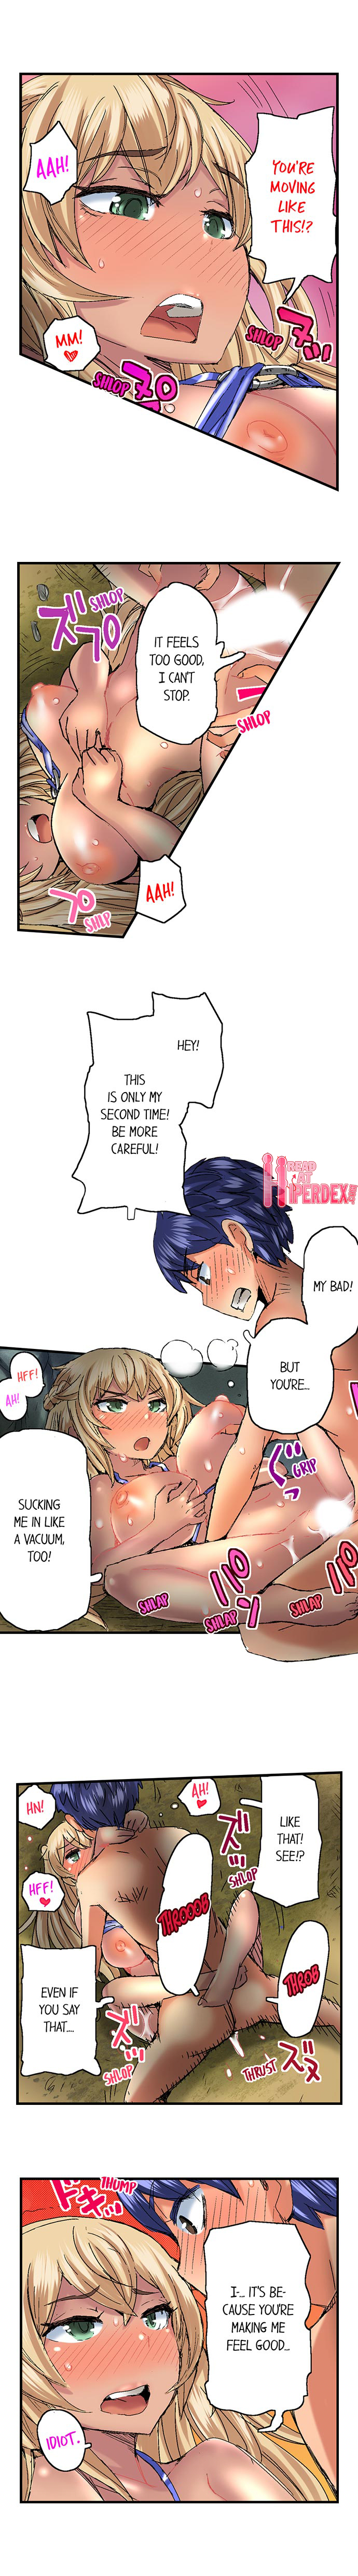 Taking a Hot Tanned Chick’s Virginity - Chapter 12 Page 6